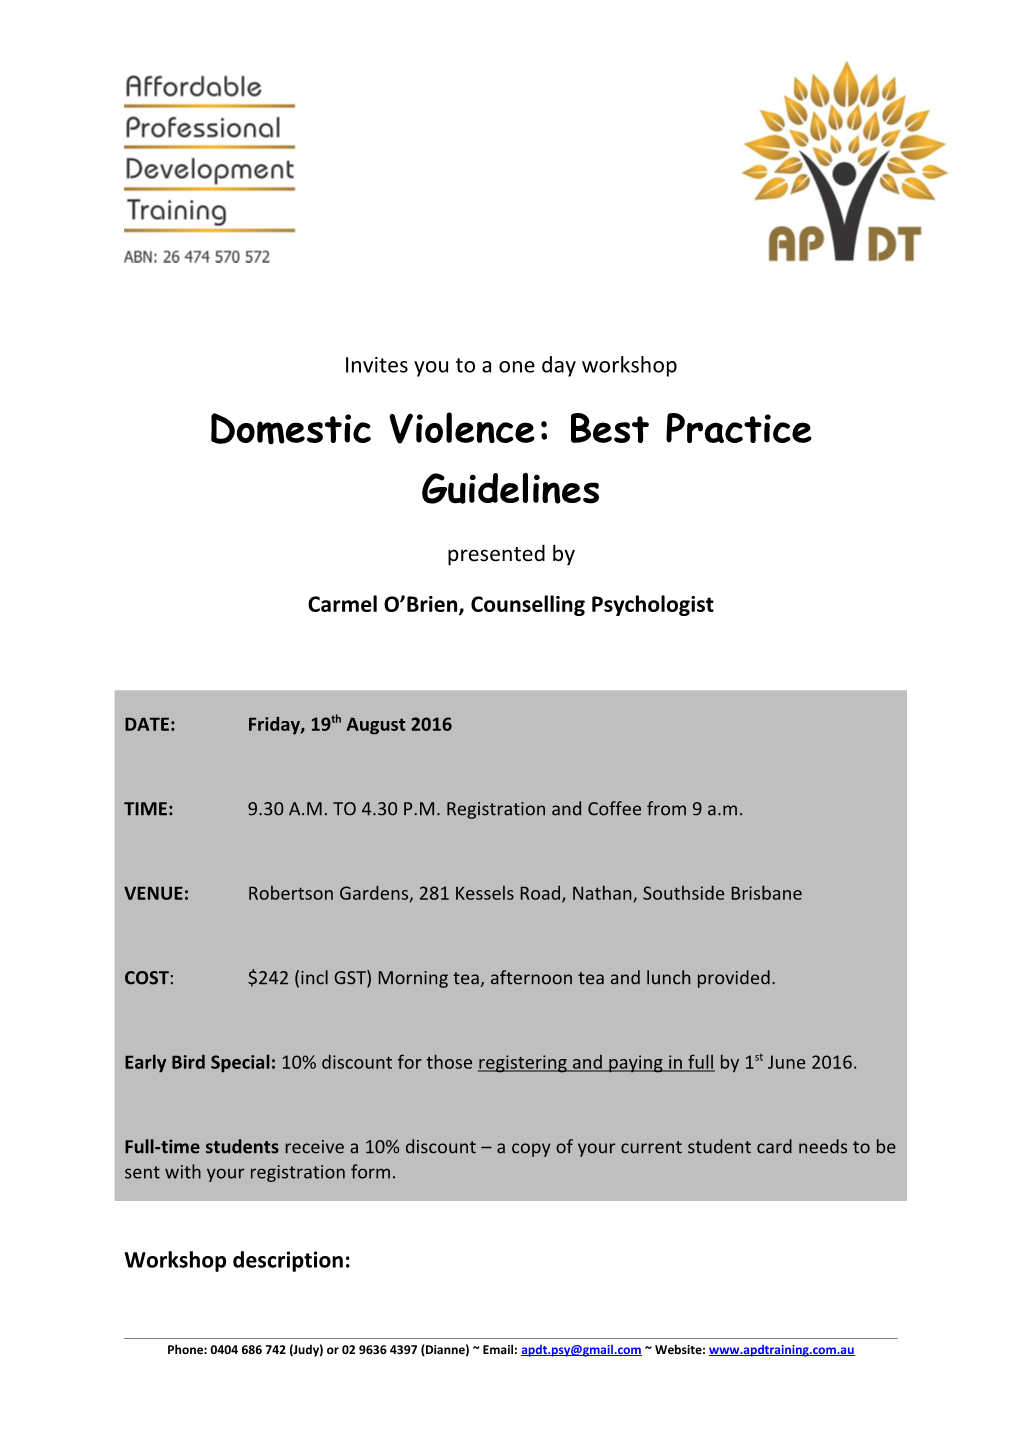 Domestic Violence: Best Practice Guidelines